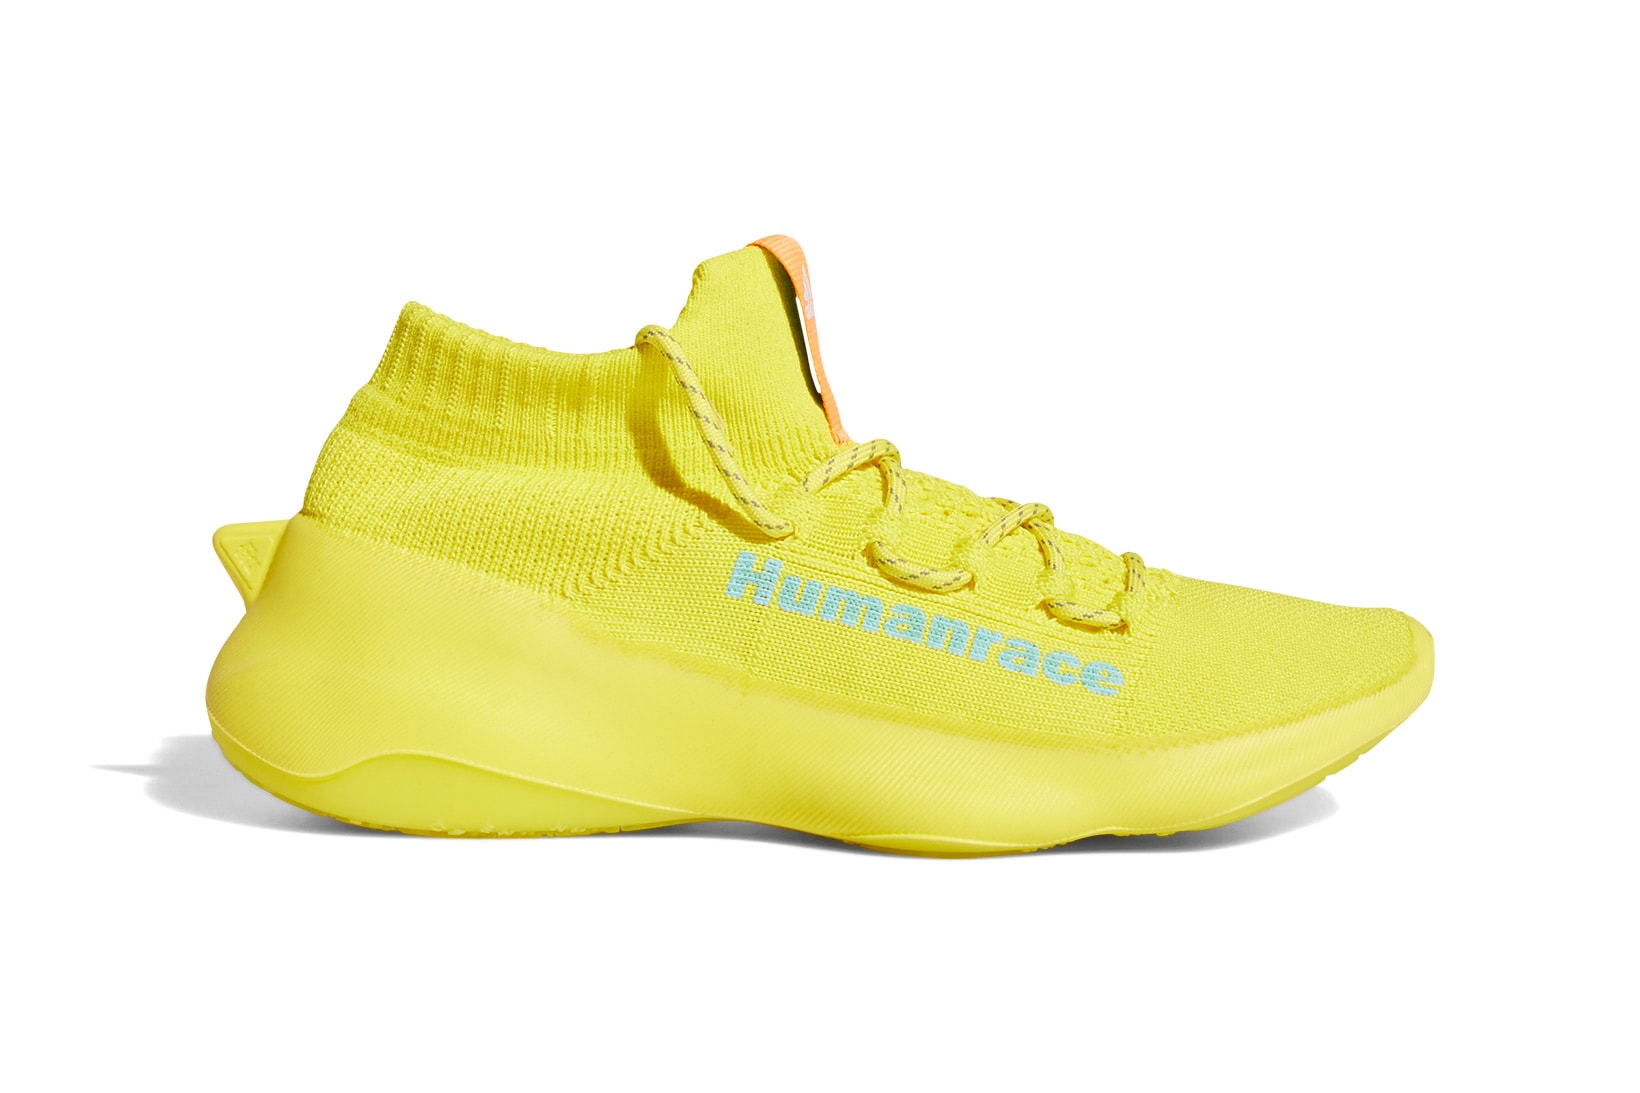 The COLOR we NEEDED? EARLY Adidas x Pharrell Williams Human Race